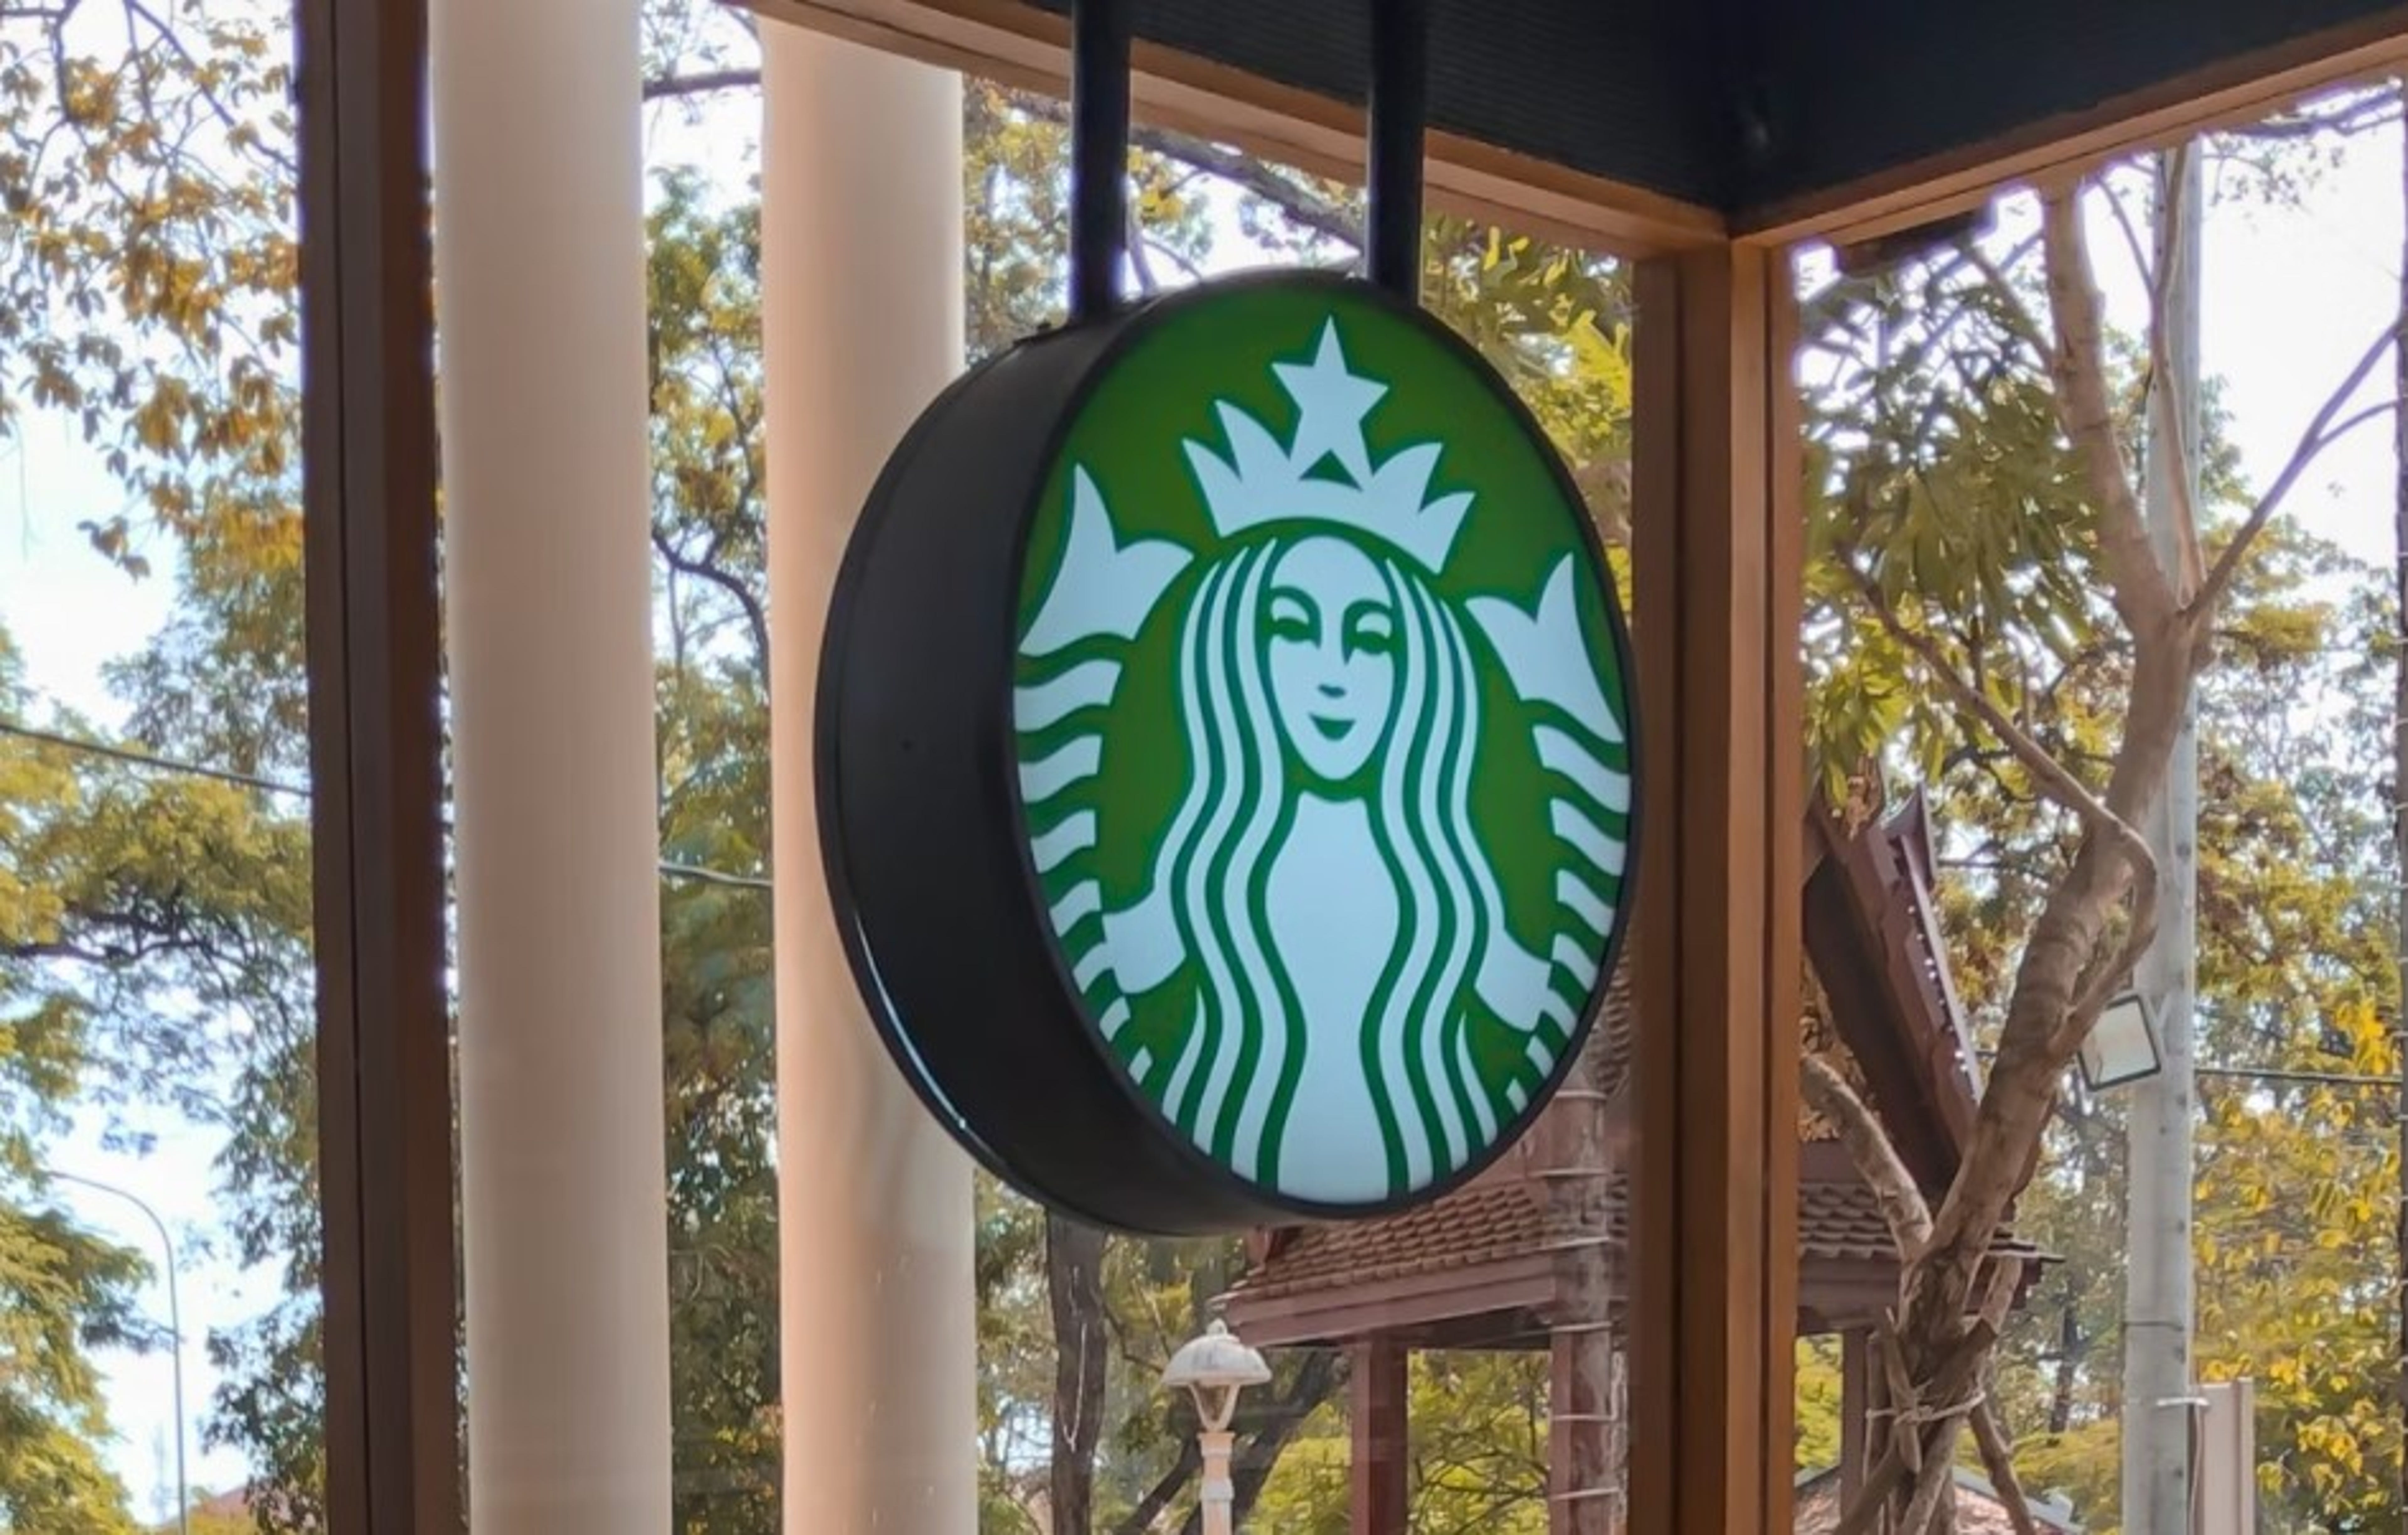 Starbucks Stock Slumps After Q1 Earnings: 5 Top Analysts React To Rising Costs, Guidance Cut